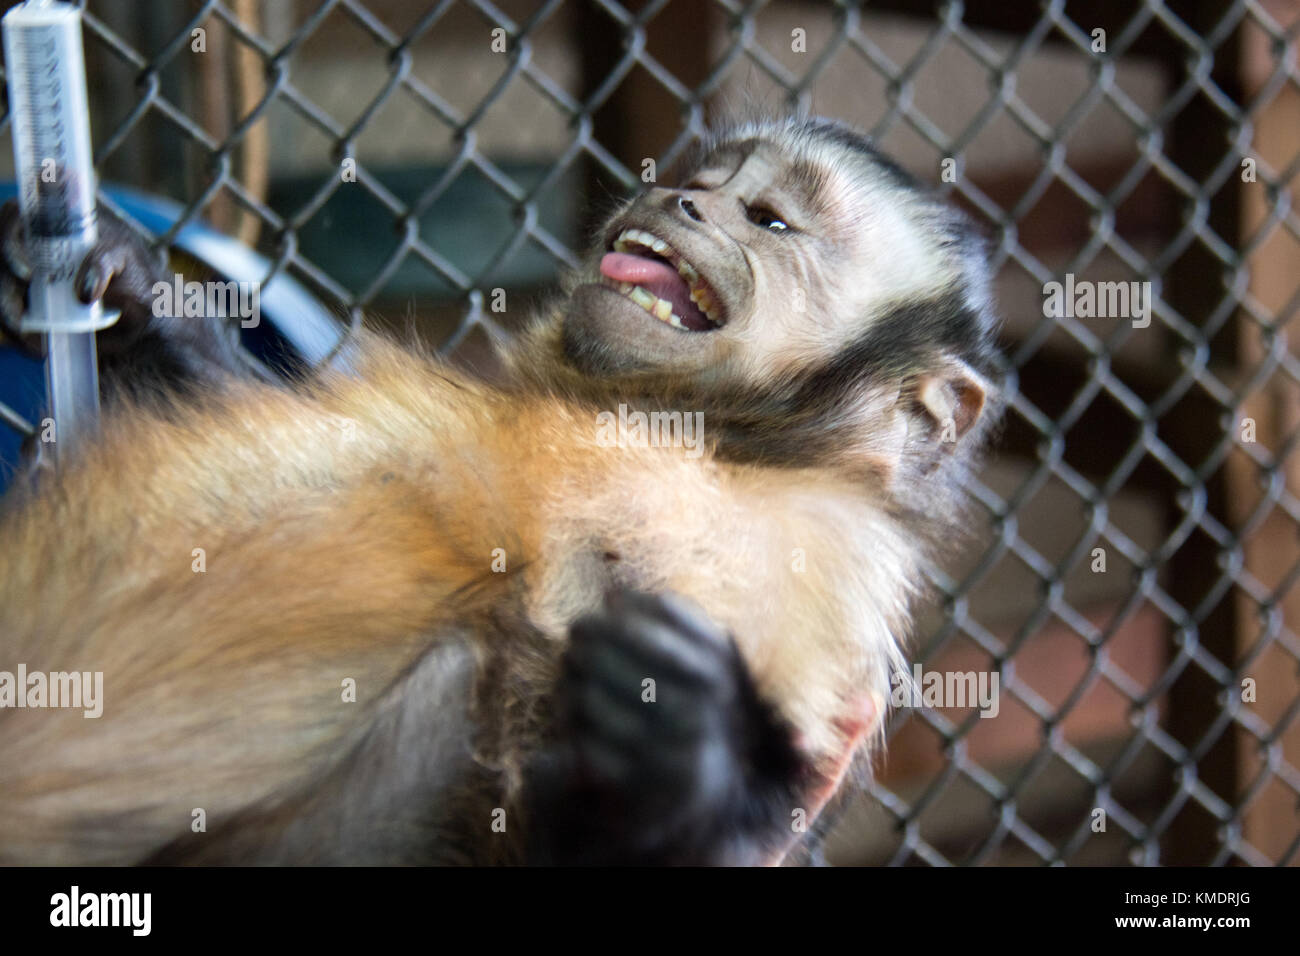 Monkey leaning back smiling with tongue out Stock Photo